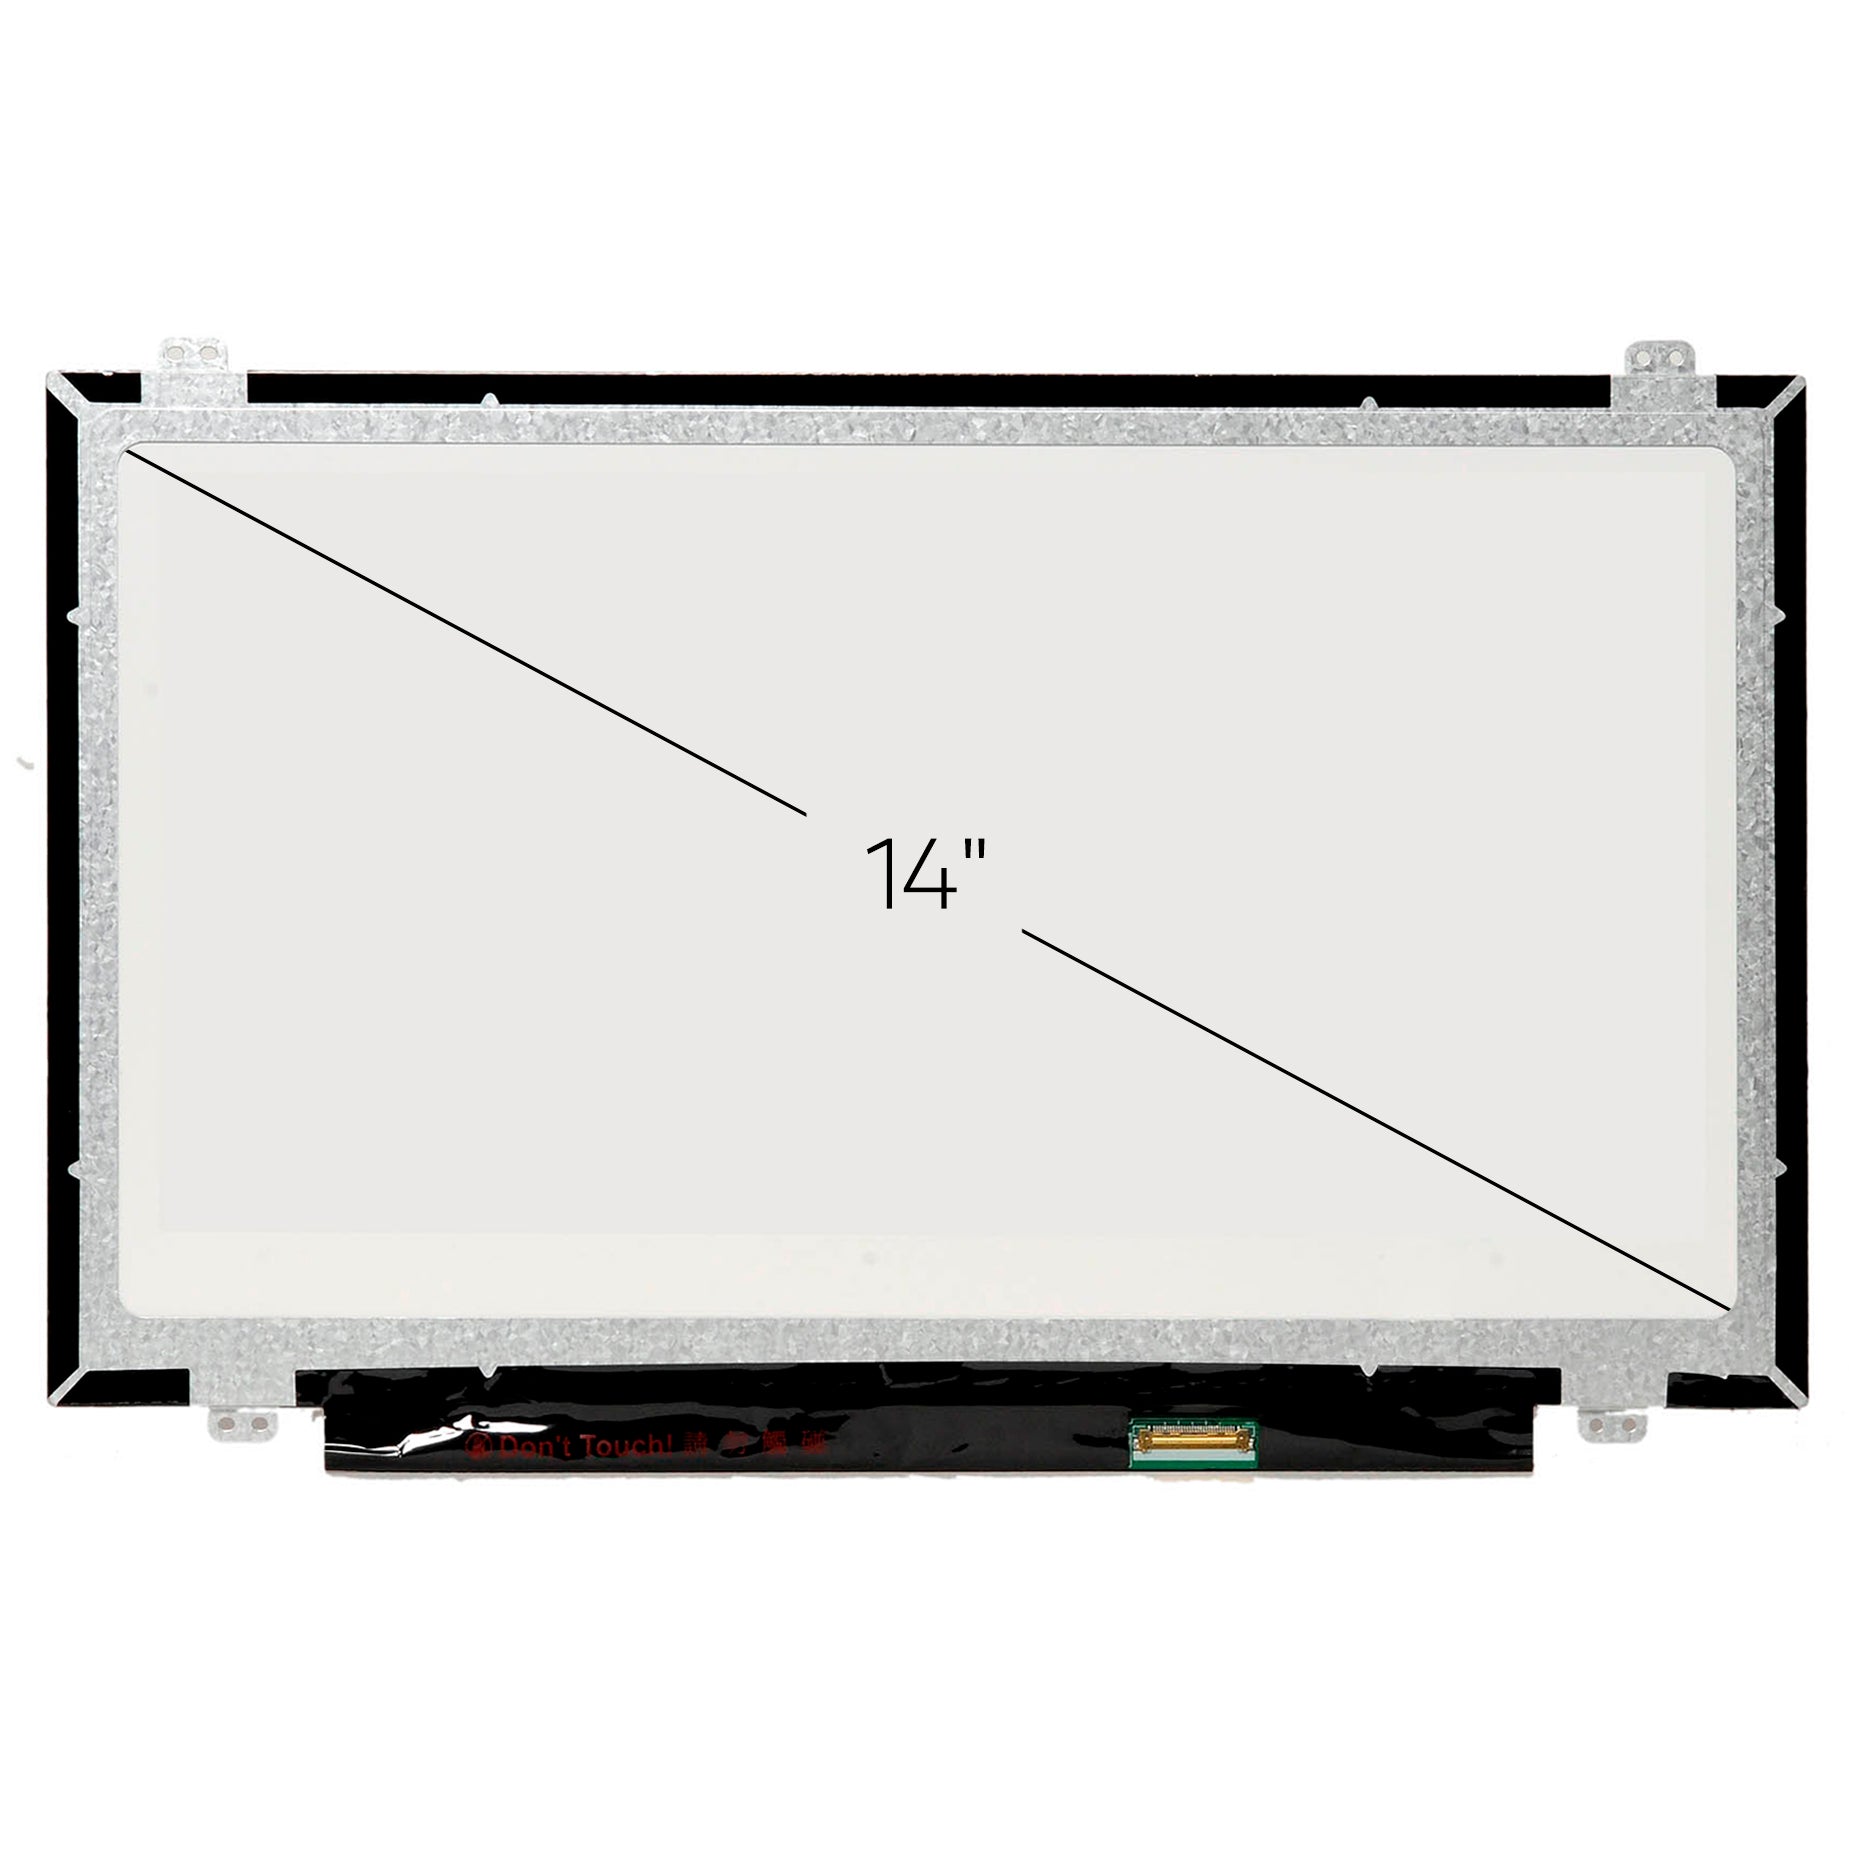 Screen Replacement for Dell P/N 057P8 D/PN 0057P8 HD 1366x768 Glossy LCD LED Display